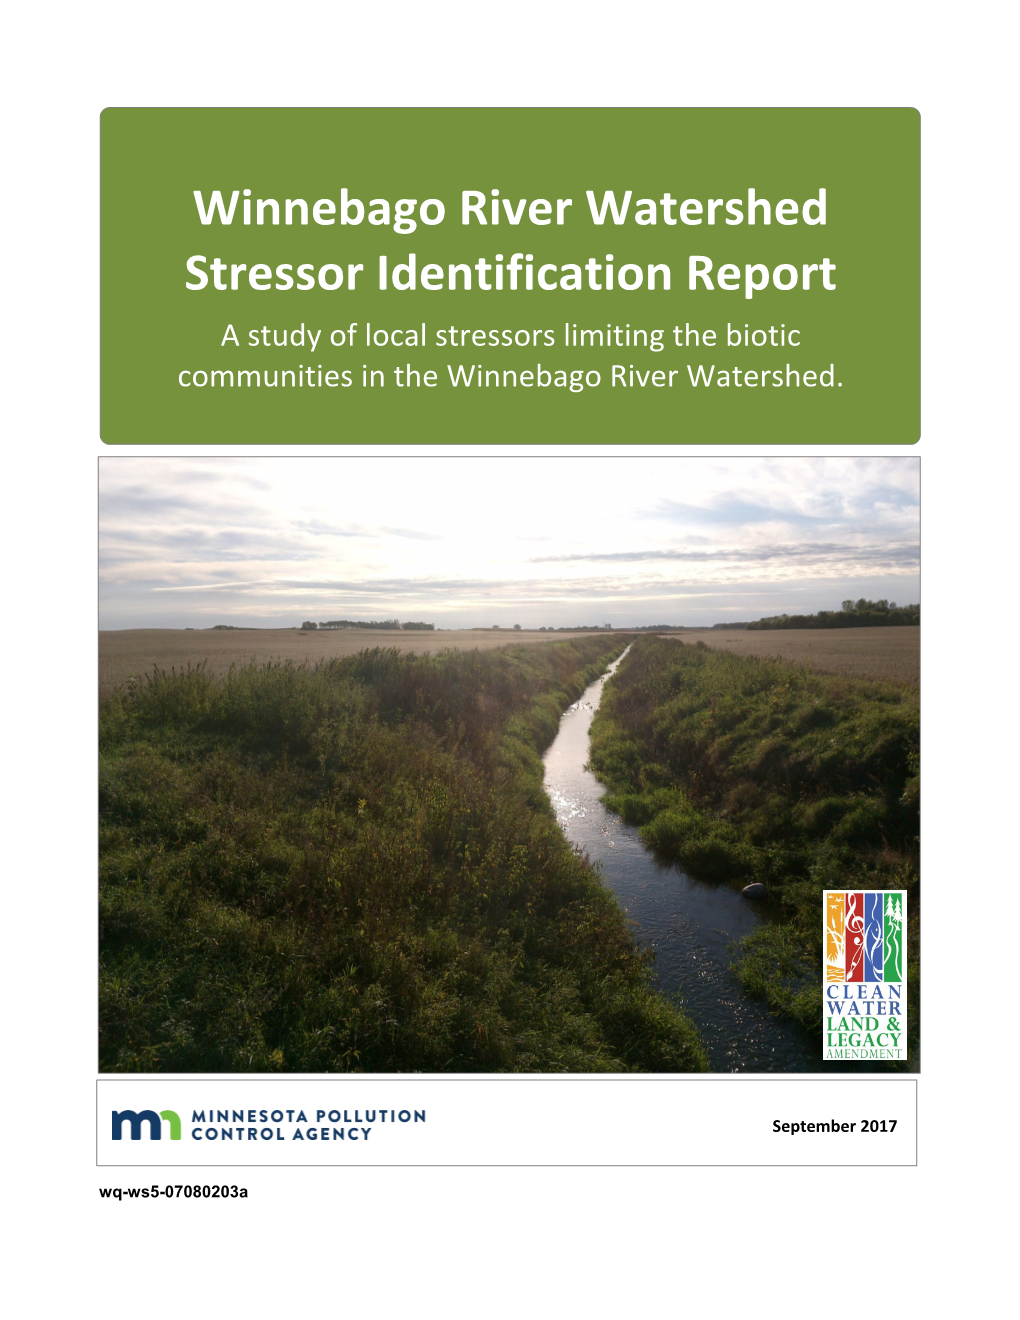 Winnebago River Watershed Stressor Identification Report a Study of Local Stressors Limiting the Biotic Communities in the Winnebago River Watershed